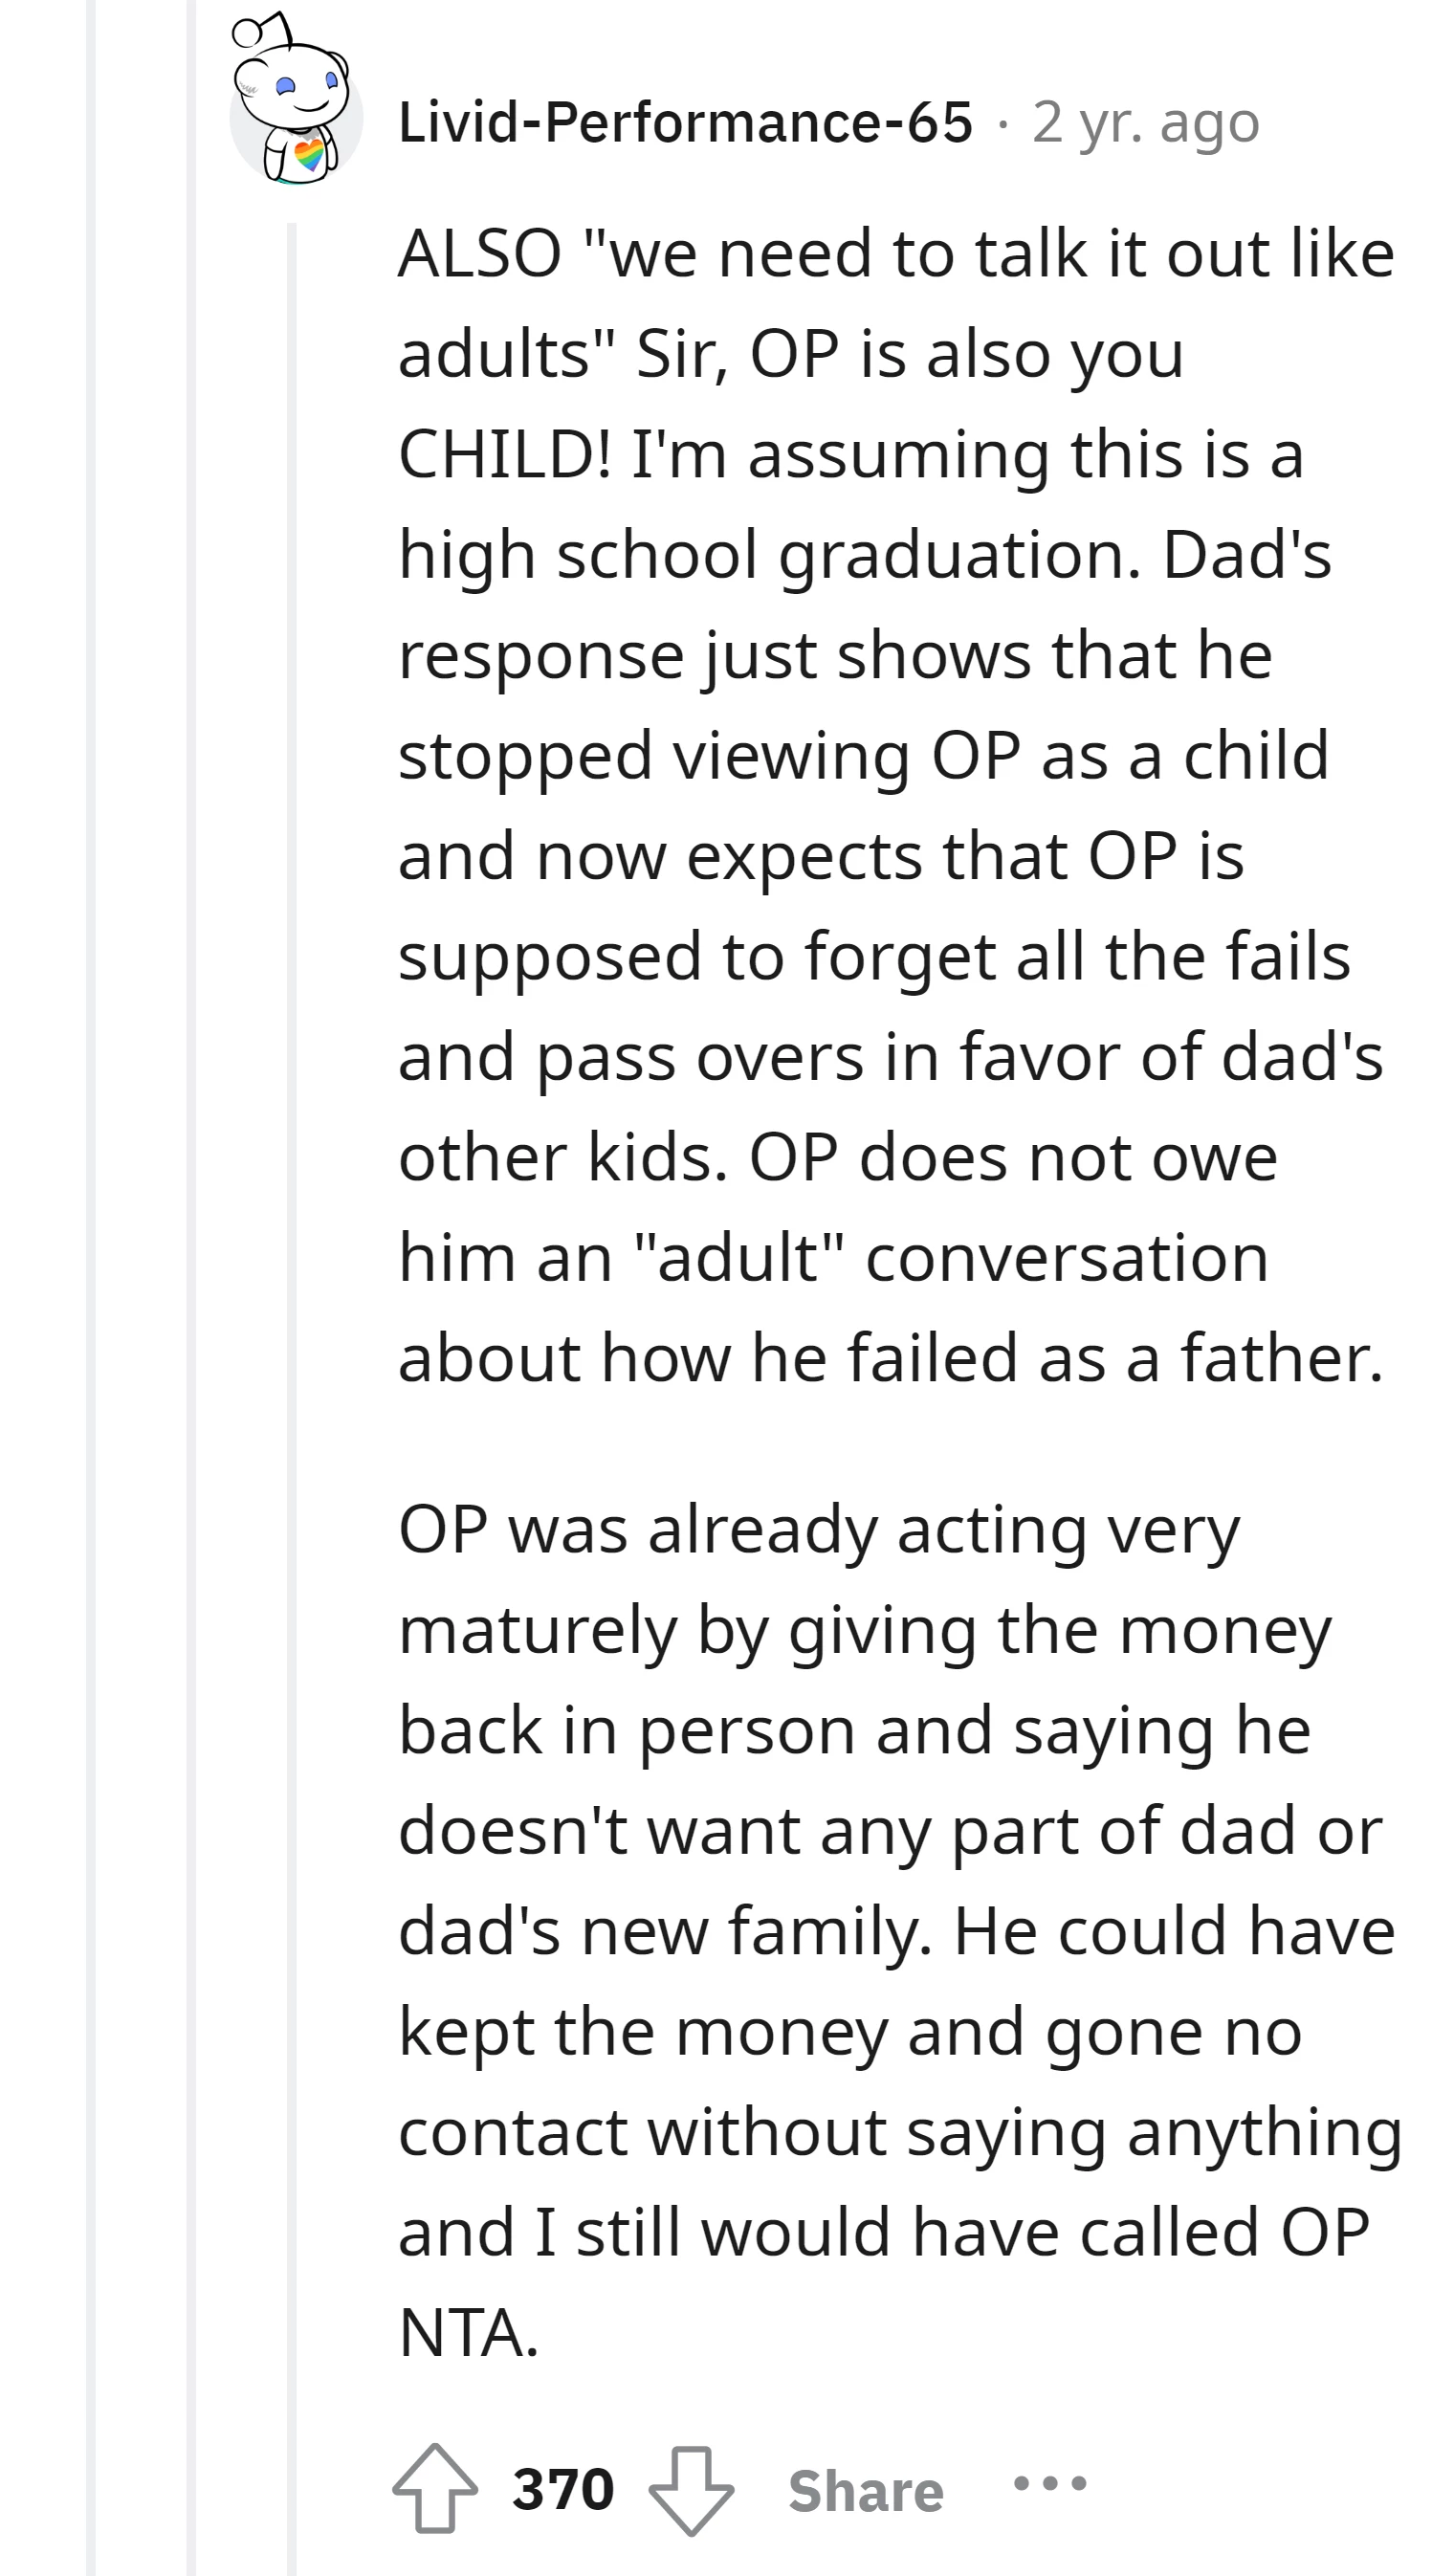 The OP doesn't owe the dad a discussion about his failures as a father